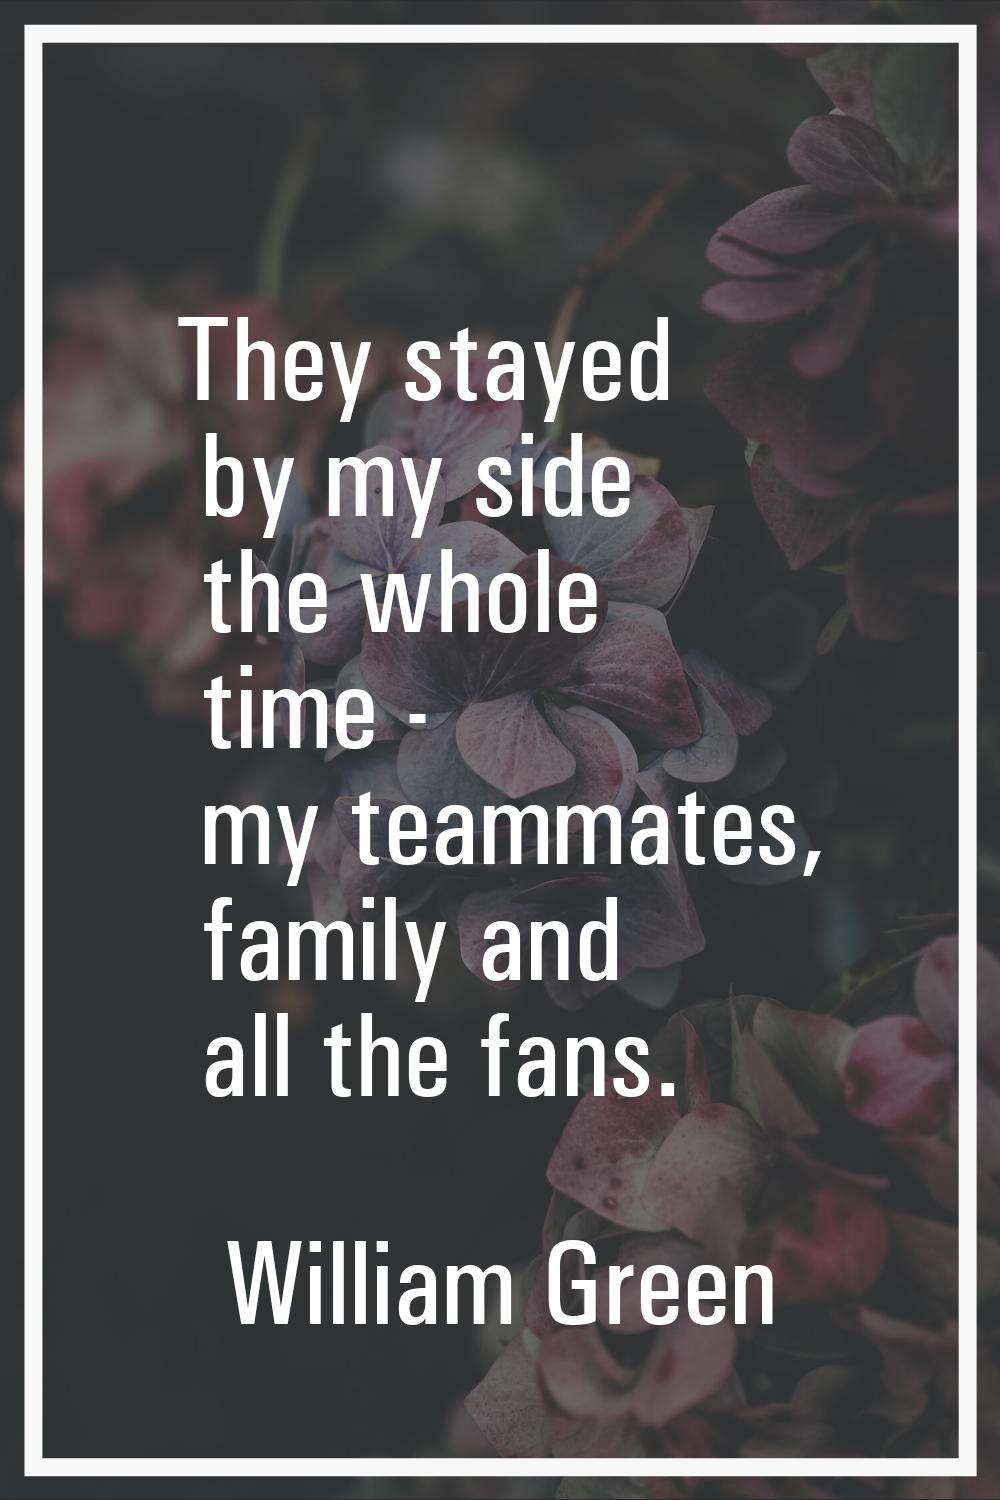 They stayed by my side the whole time - my teammates, family and all the fans.